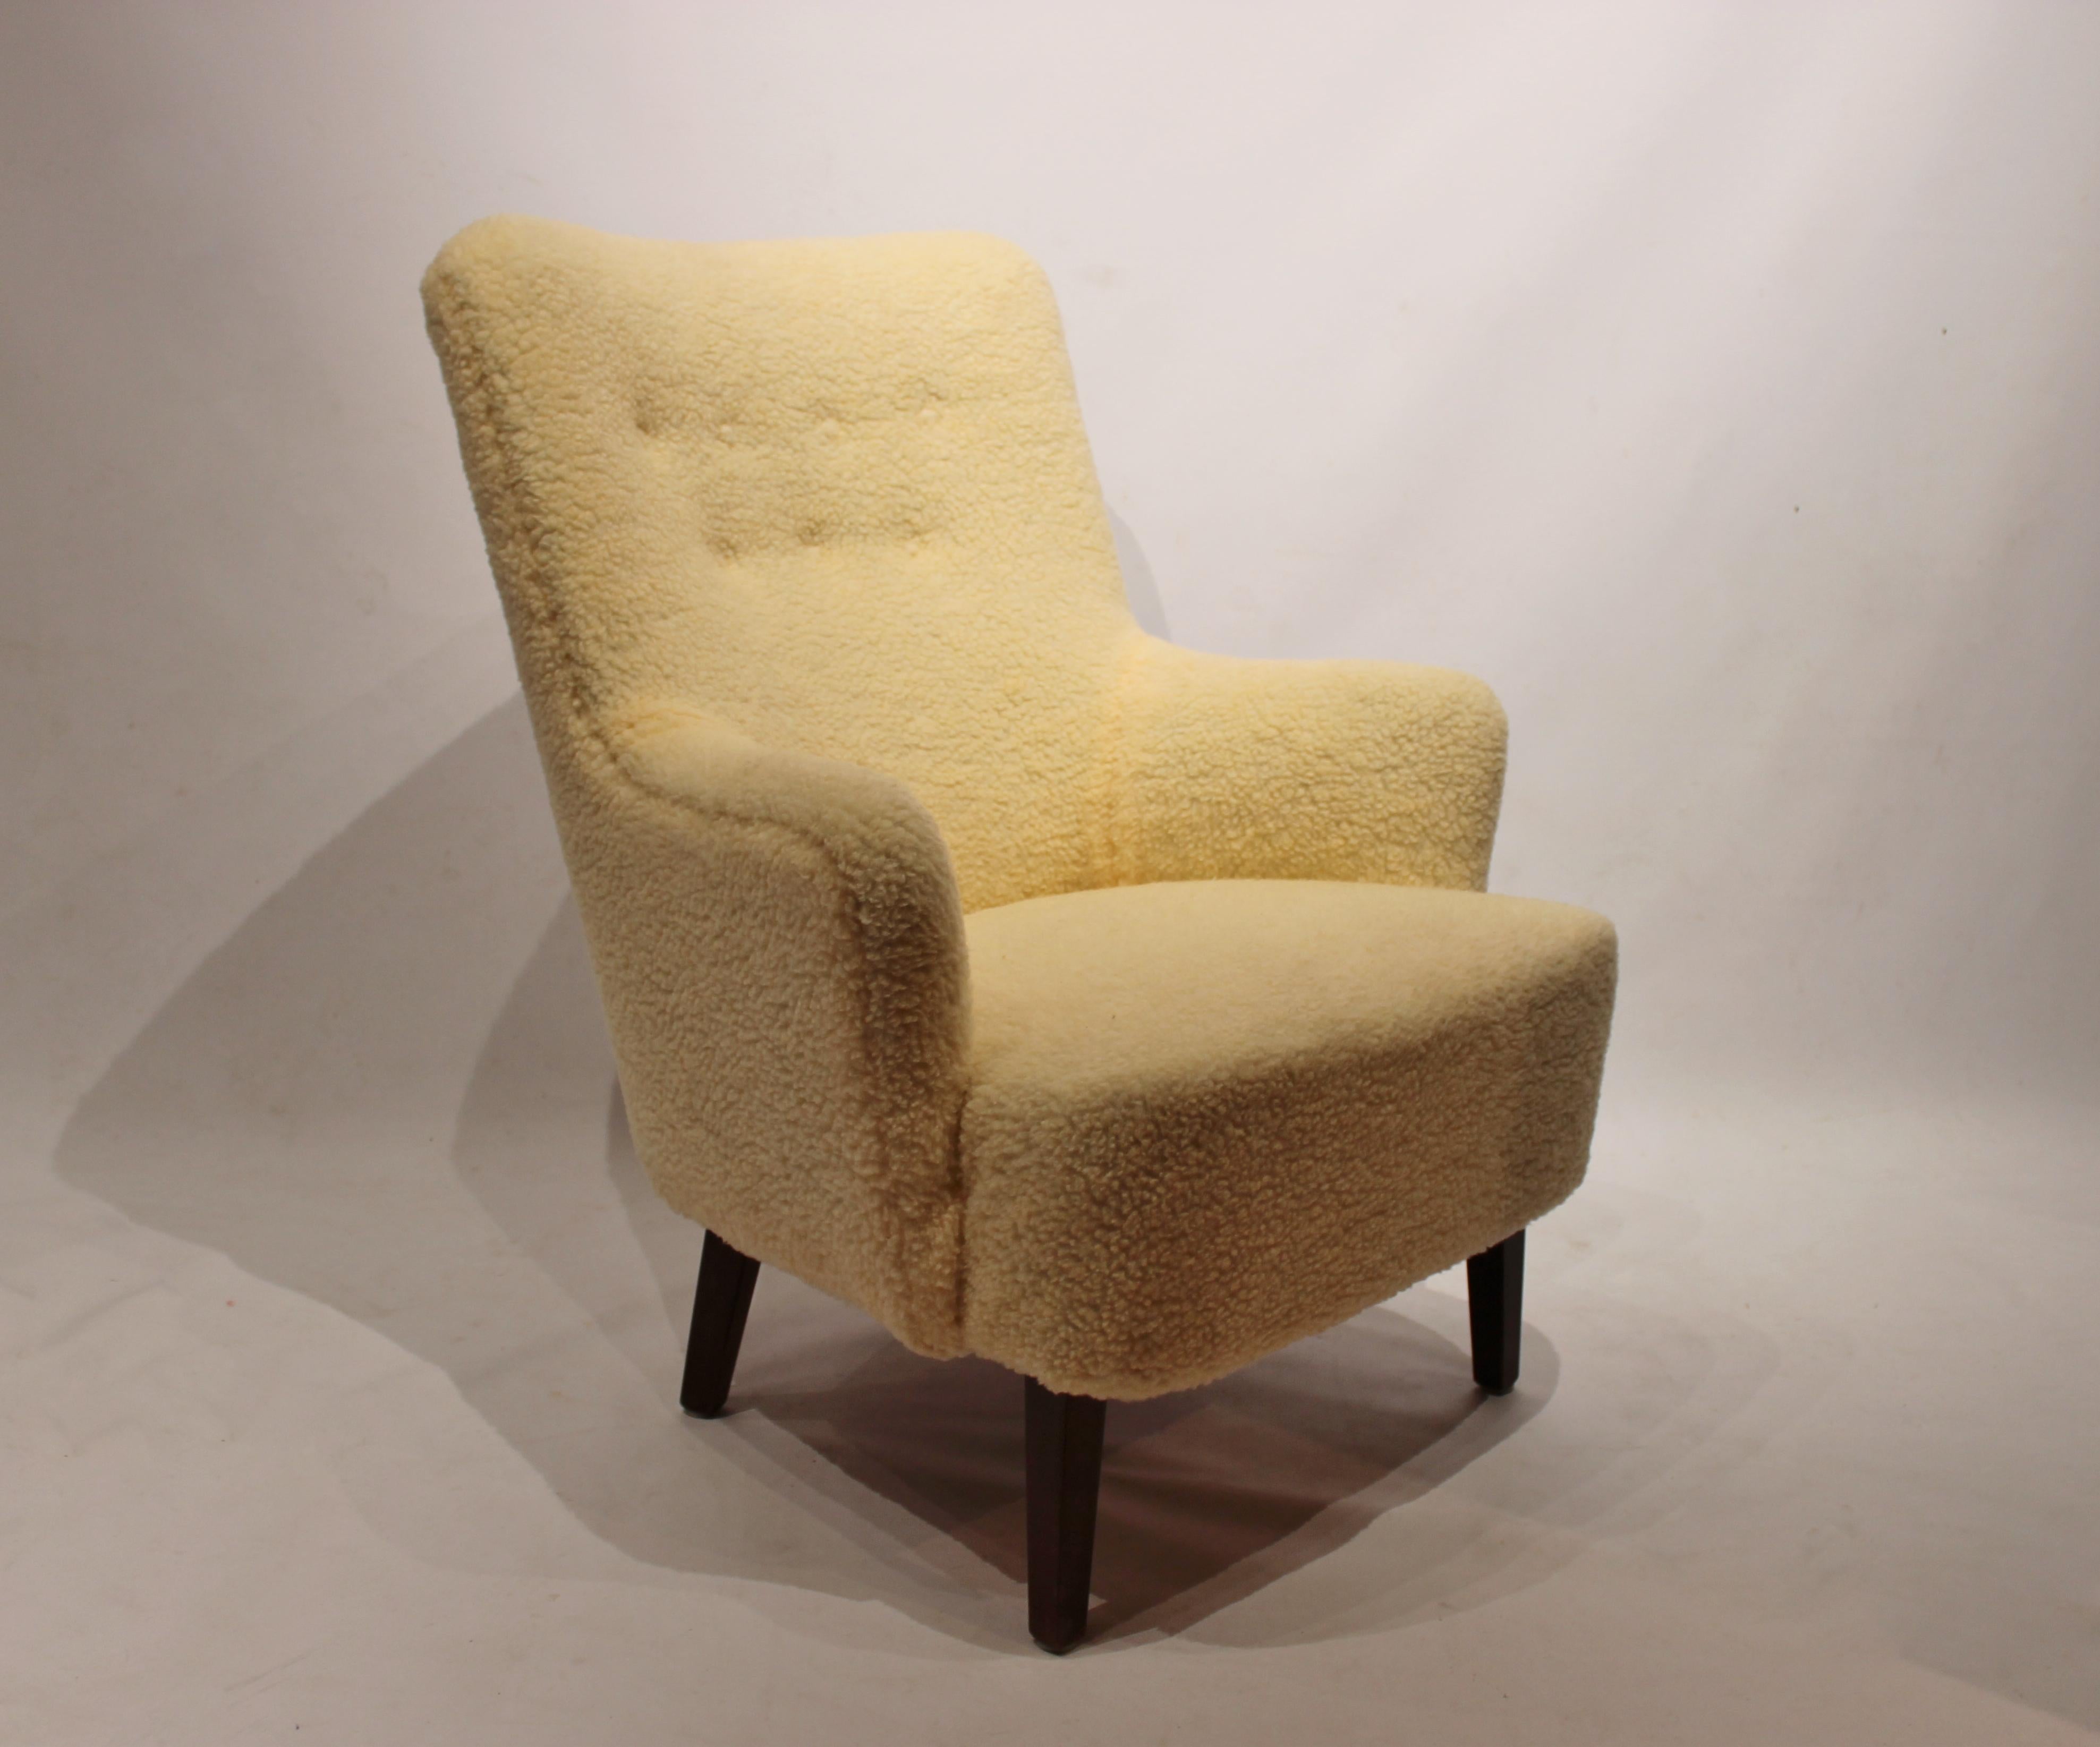 Easy chair upholstered with sheep wool and legs of mahogany from the 1940s. The chair is in great vintage condition.